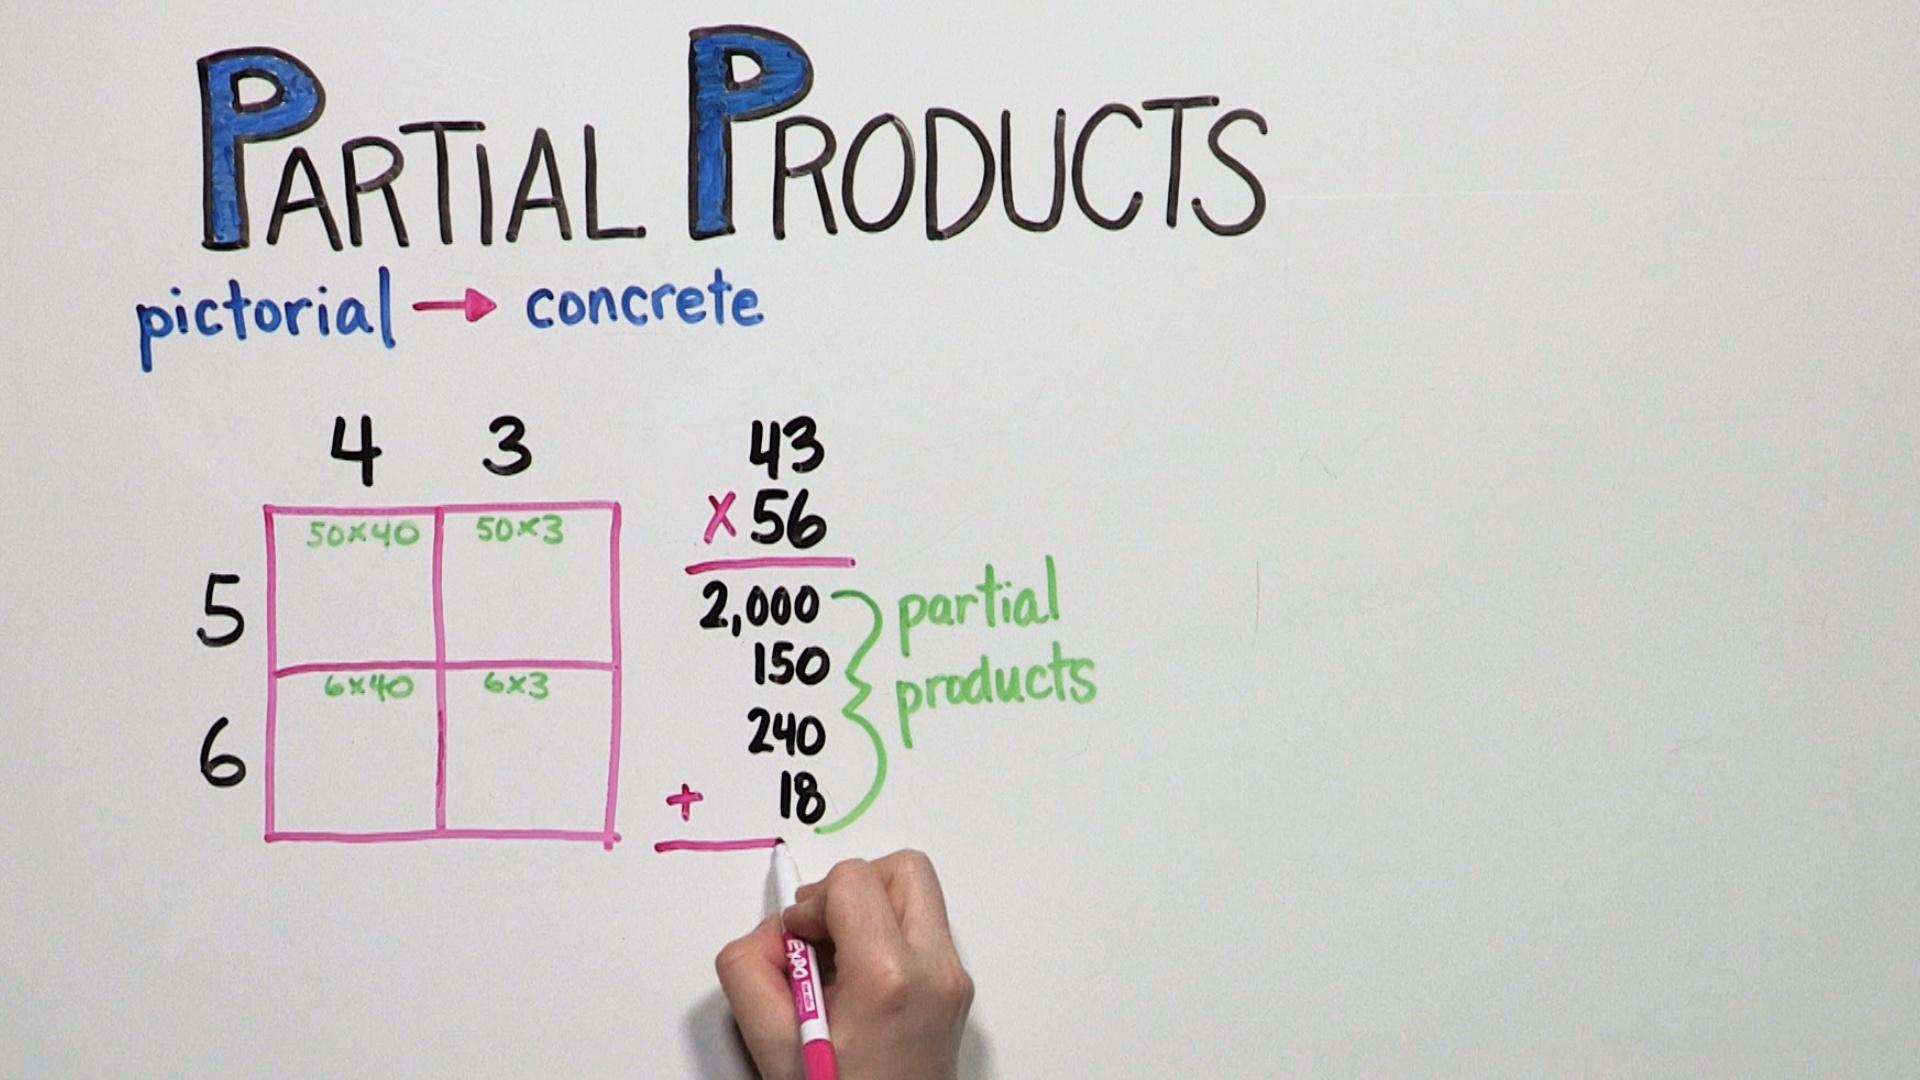 partial-products-pbs-learningmedia